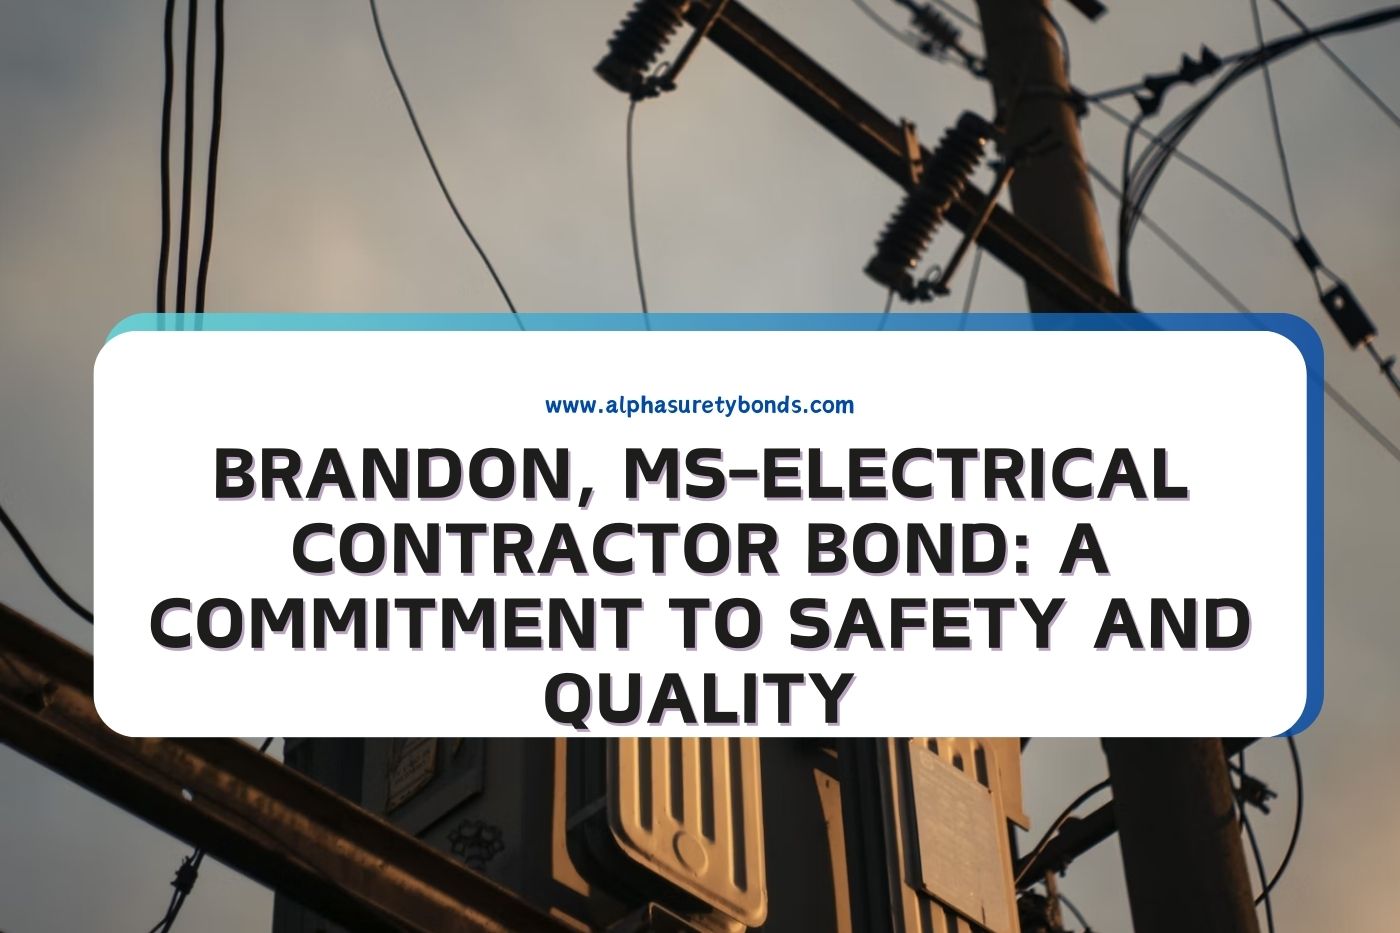 Brandon, MS-Electrical Contractor Bond: A Commitment to Safety and Quality